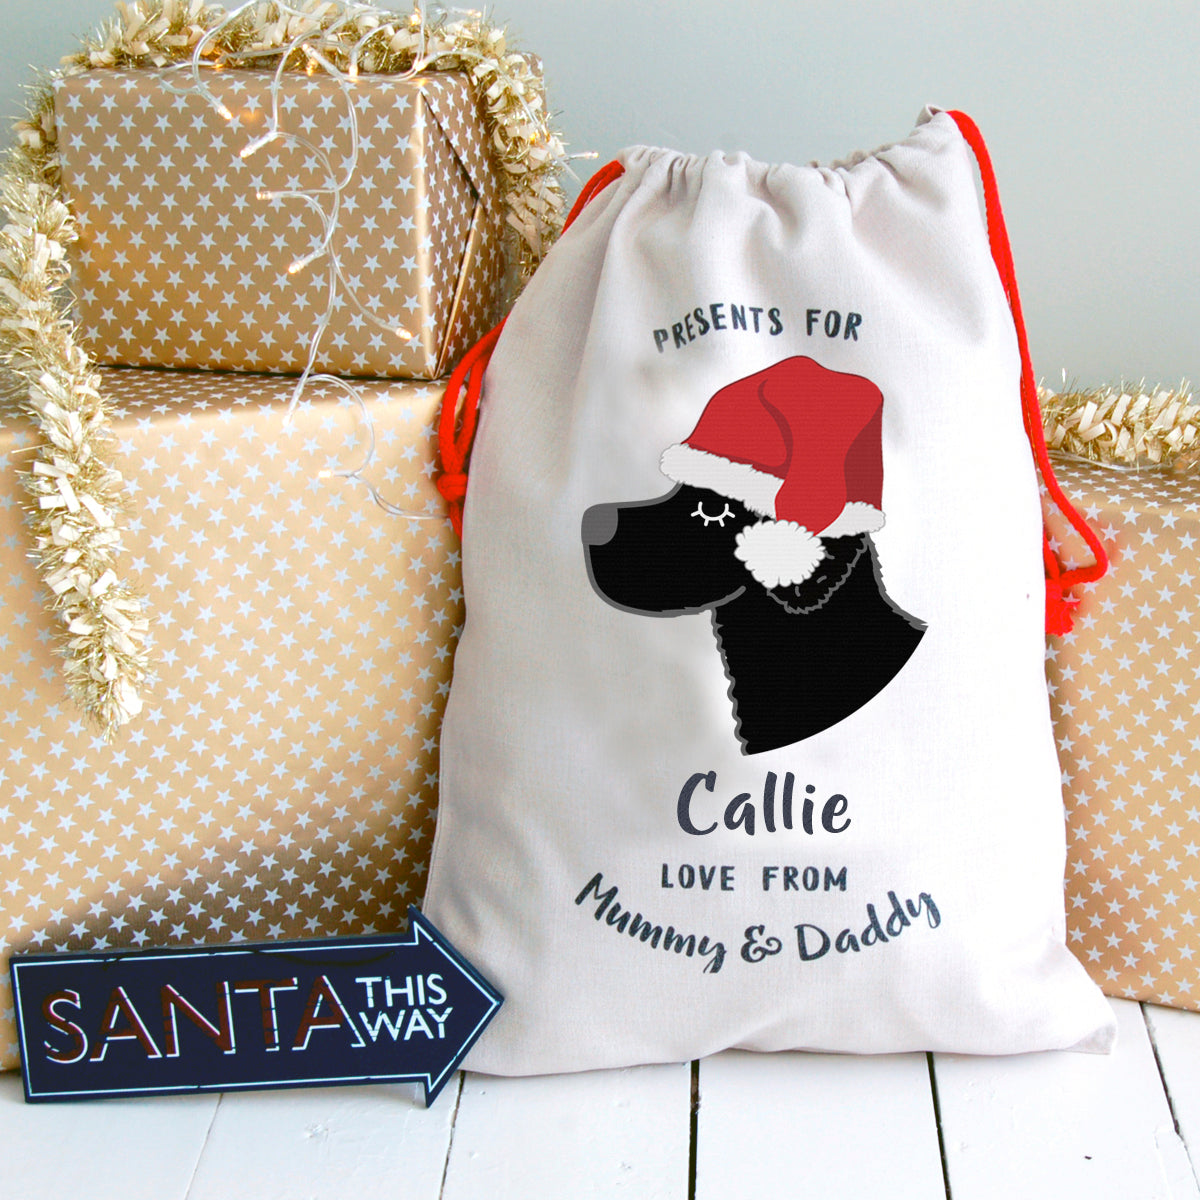 Curly Coated Retriever Personalised Christmas Present Sack  - Hoobynoo - Personalised Pet Tags and Gifts